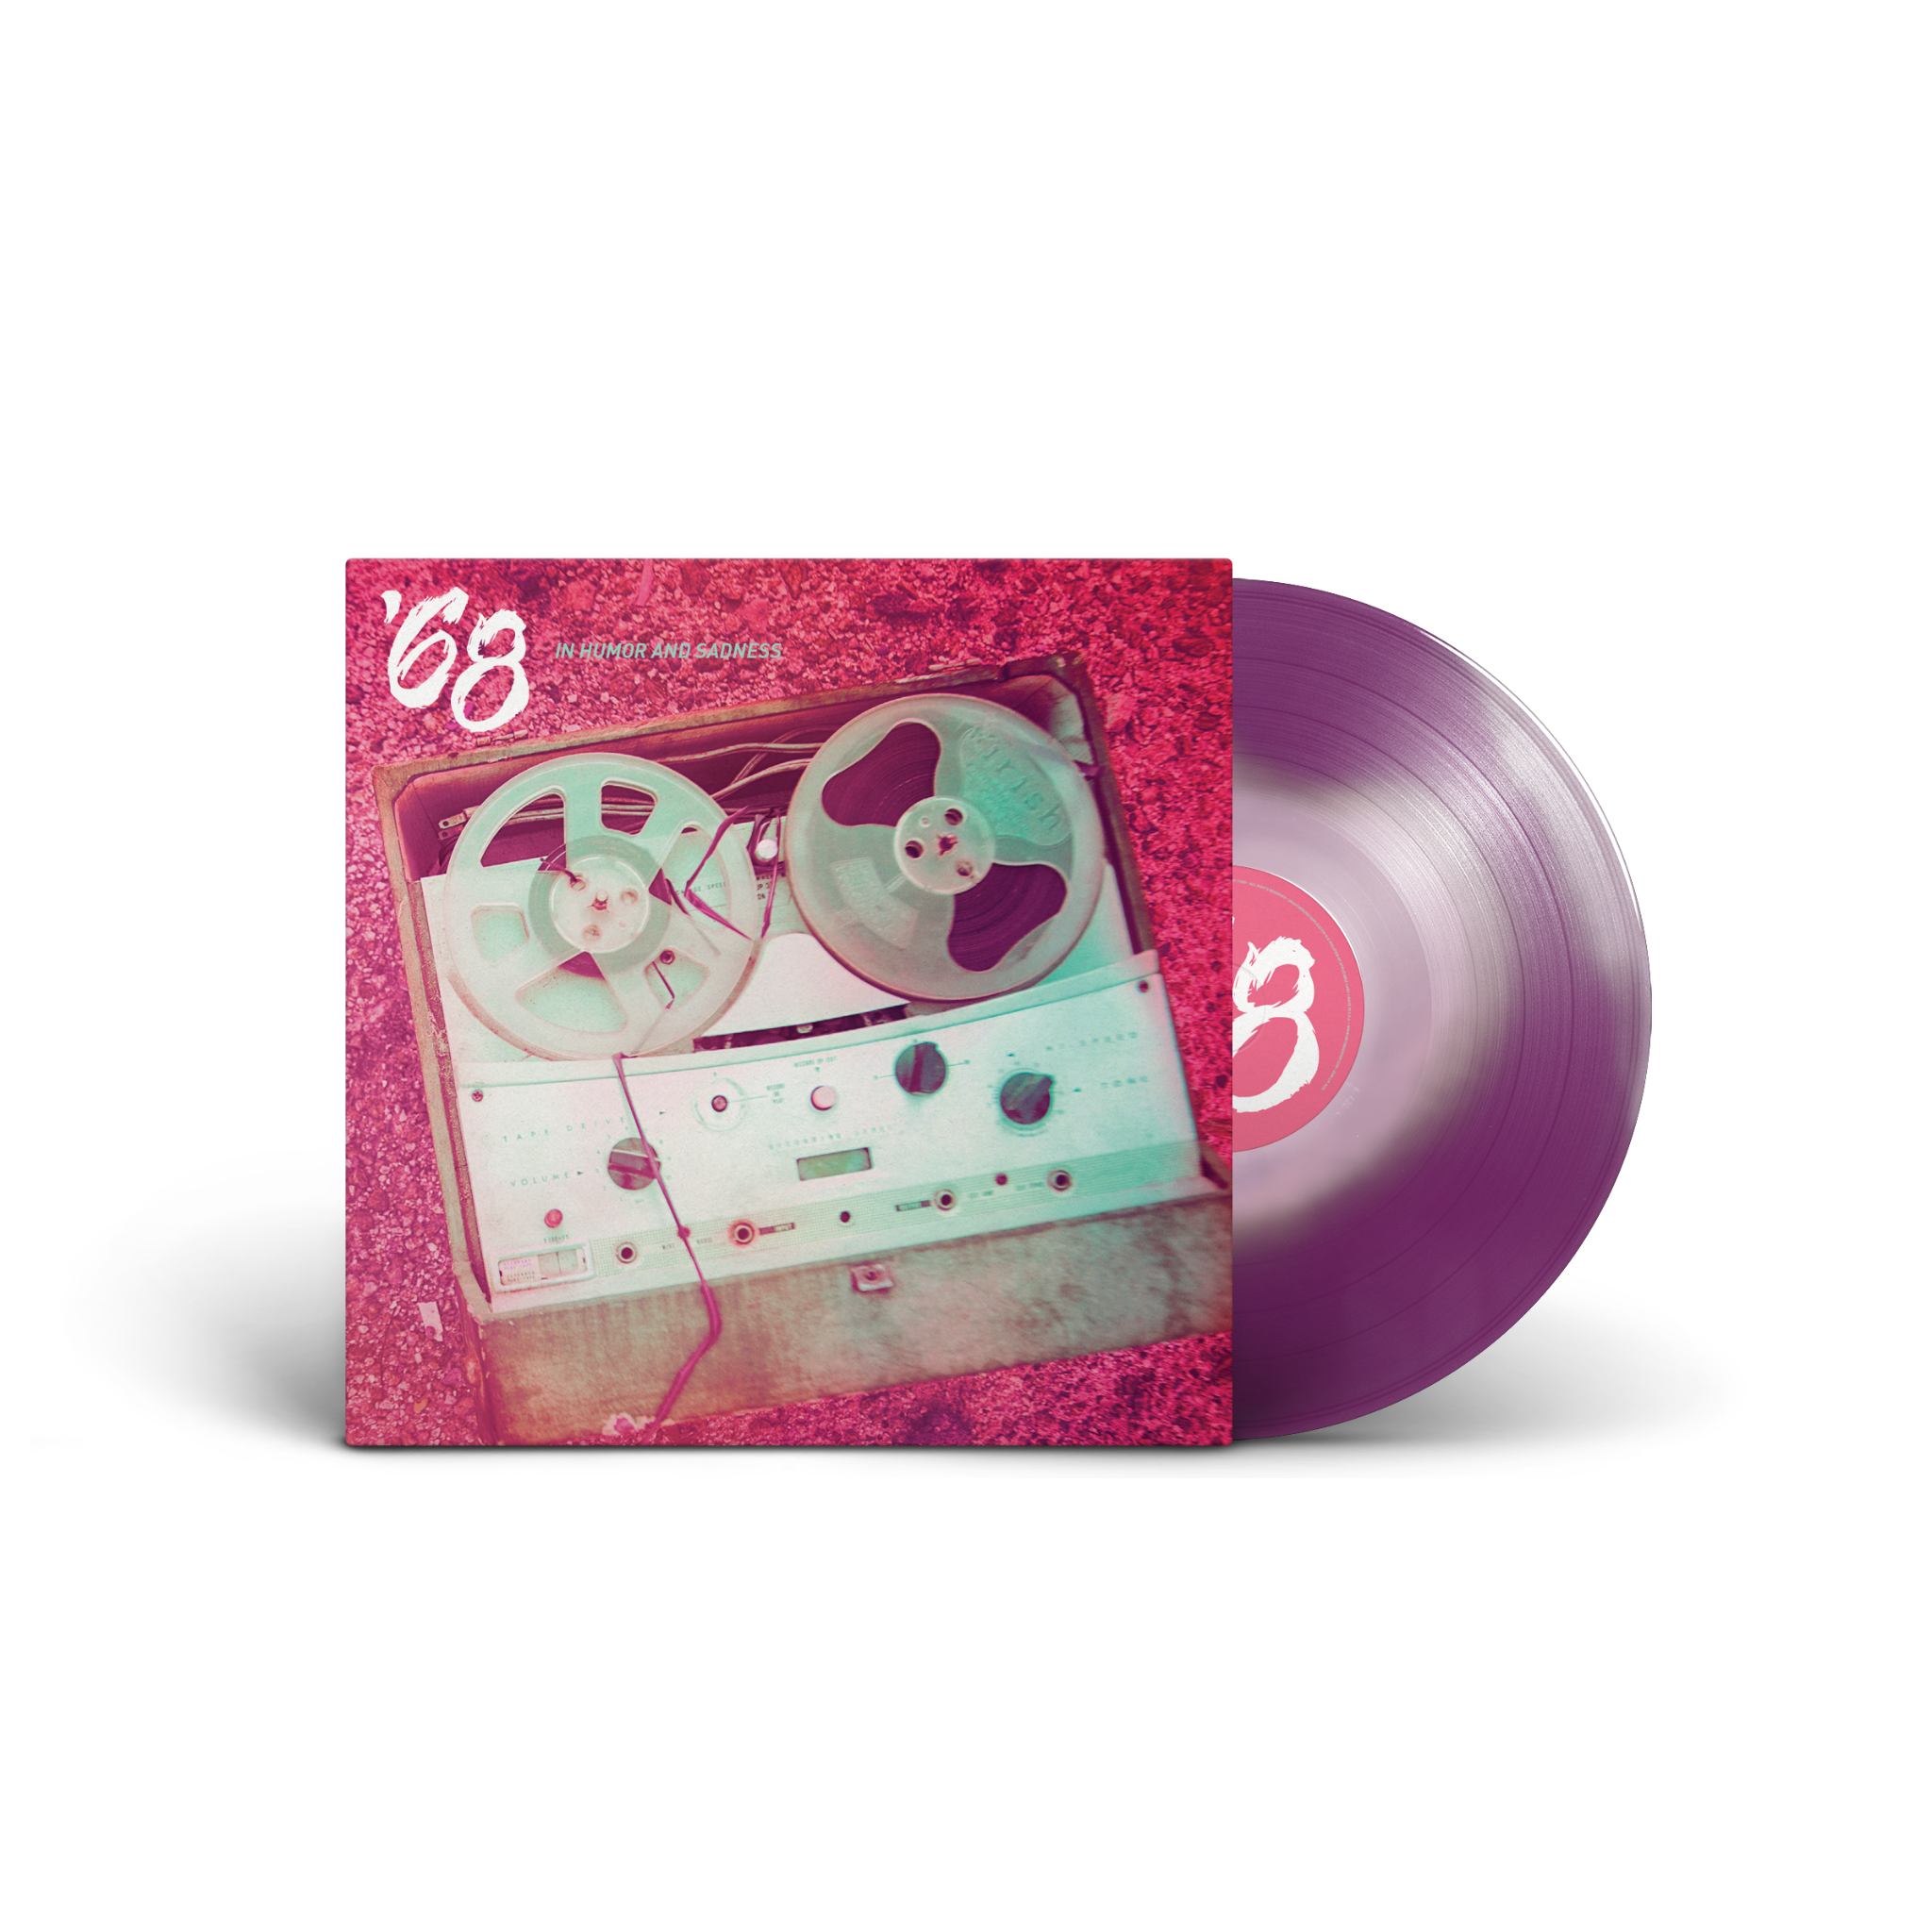 68 - "In Humor And Sadness" Opaque Orchid Purple & Opaque White LP (Blemished)